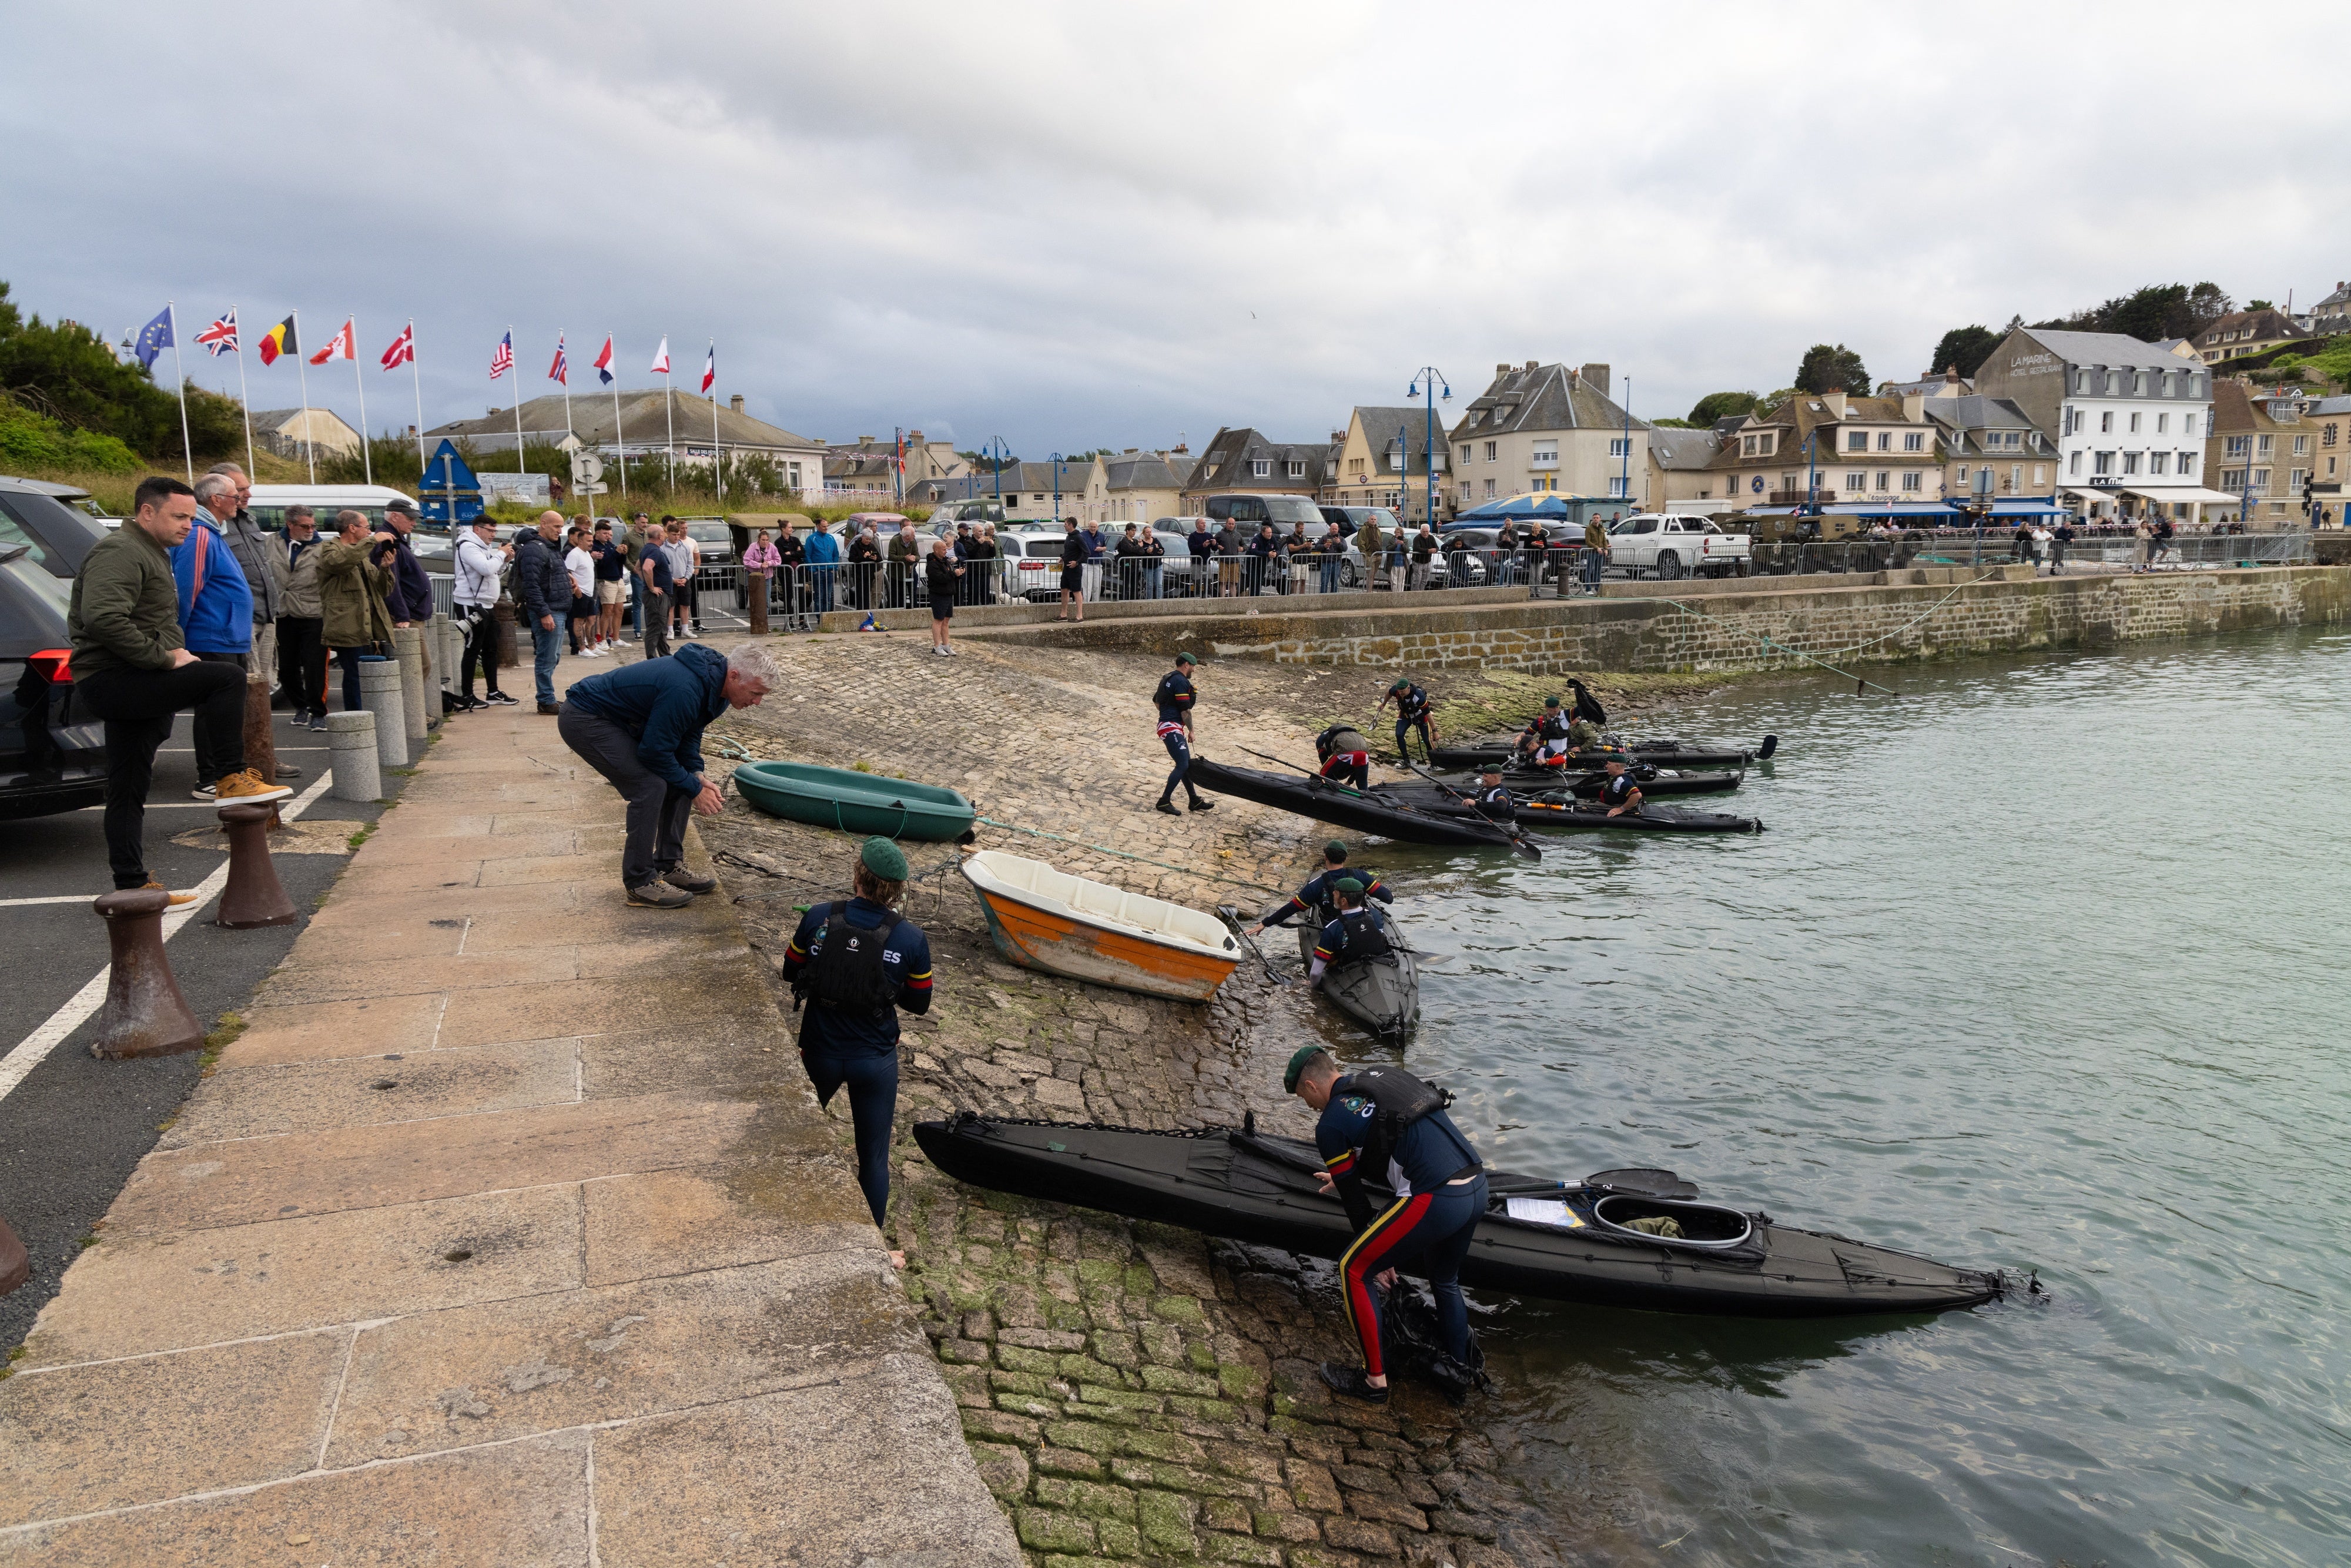 RMA kayakers arriving in Normandy to mark 80th Anniversary of D-Day